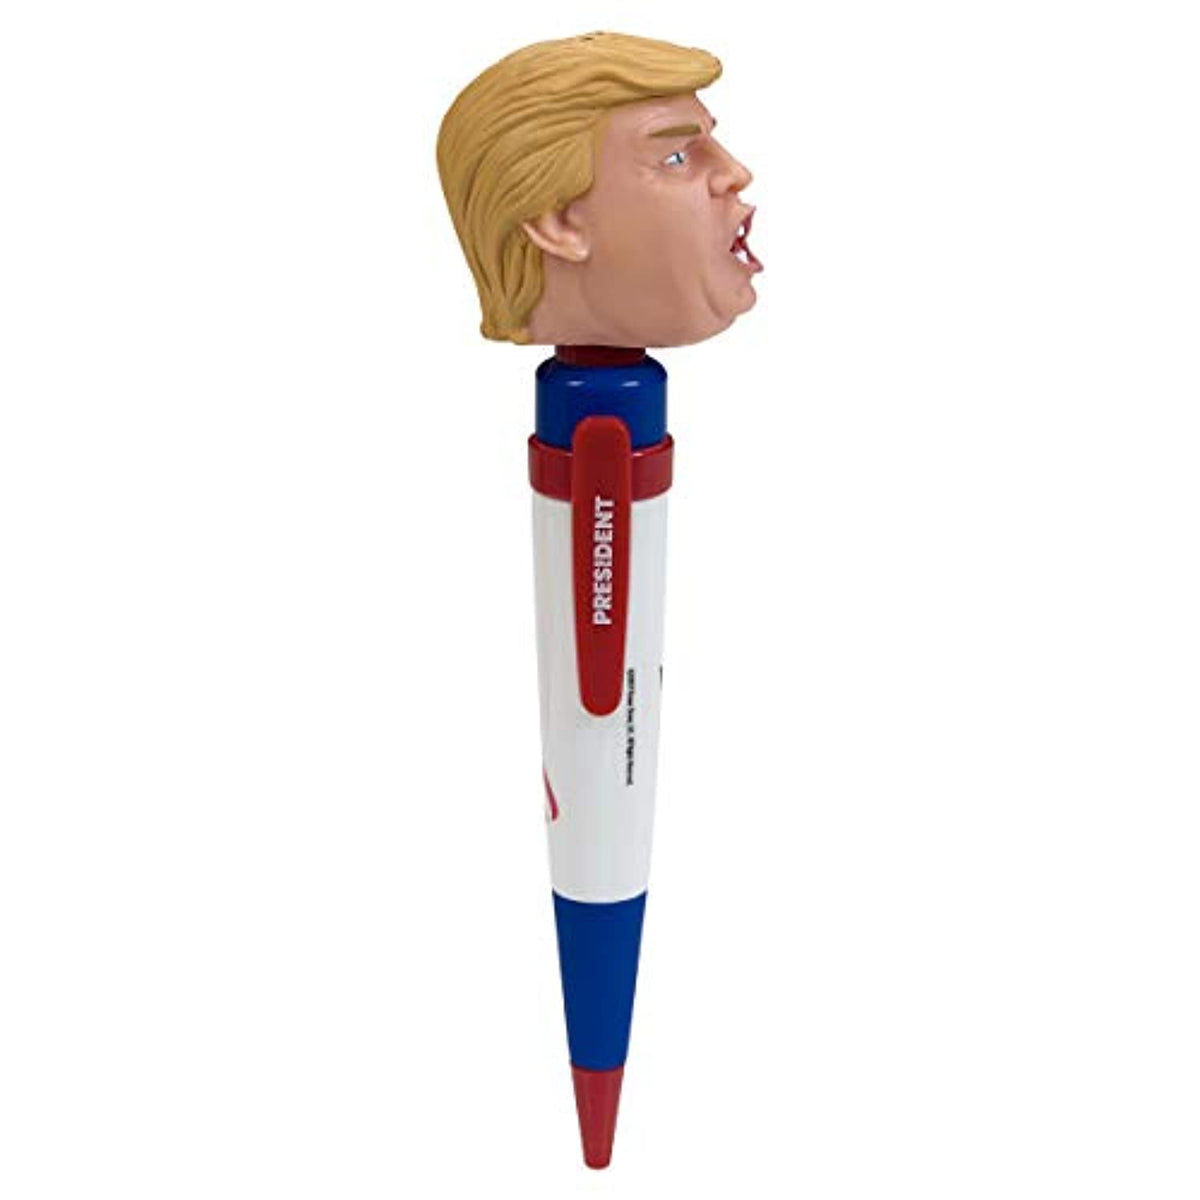 8 Different Sayings Donald Trump's REAL VOICE Talking Pen 